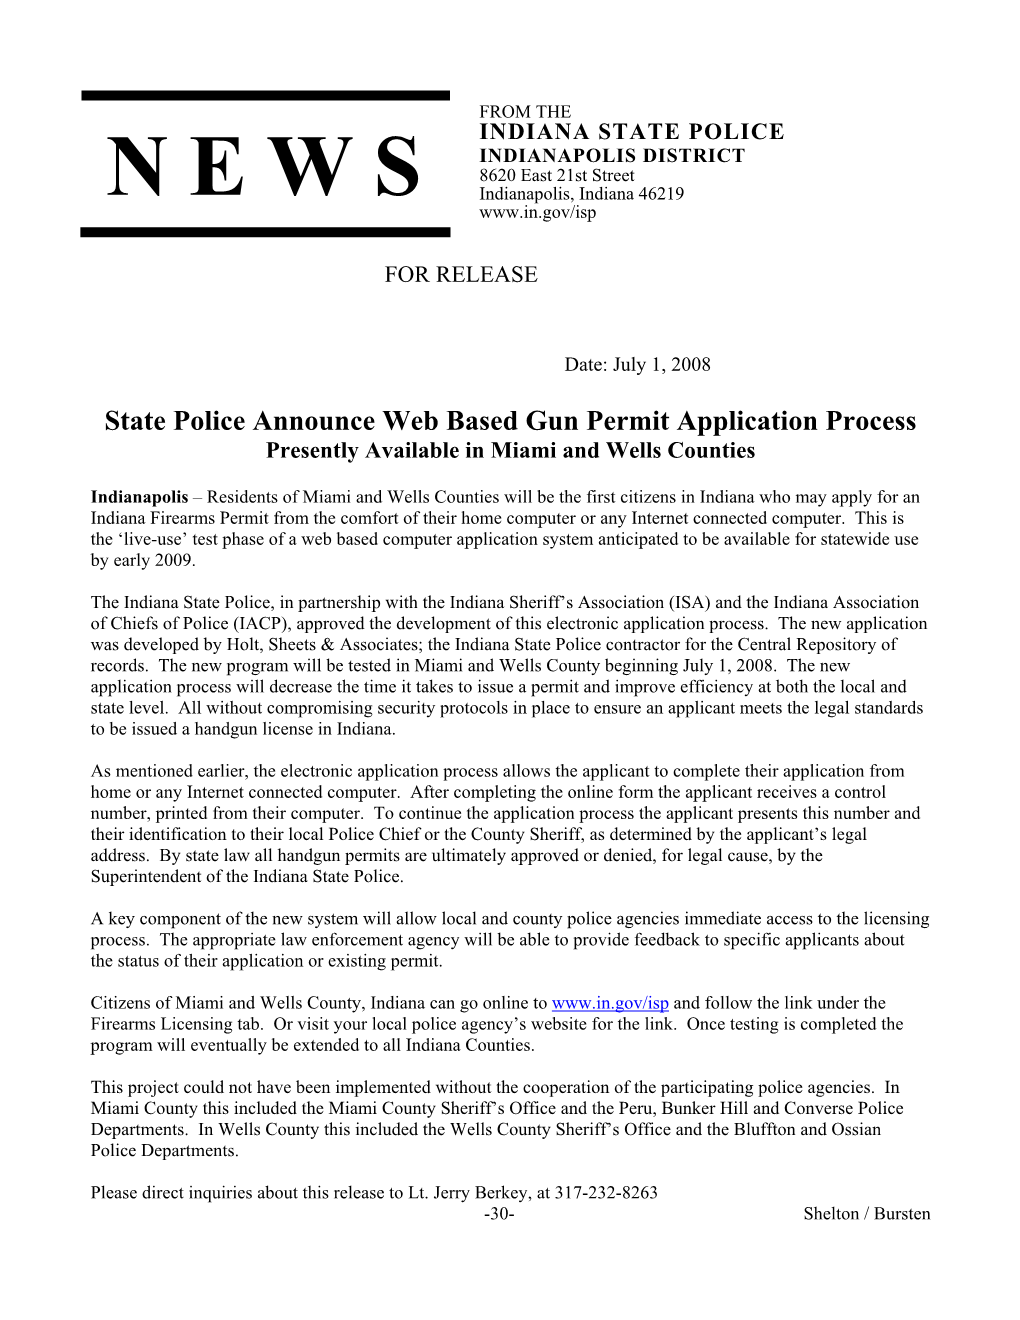 ISP-News Release, Indianapolis District